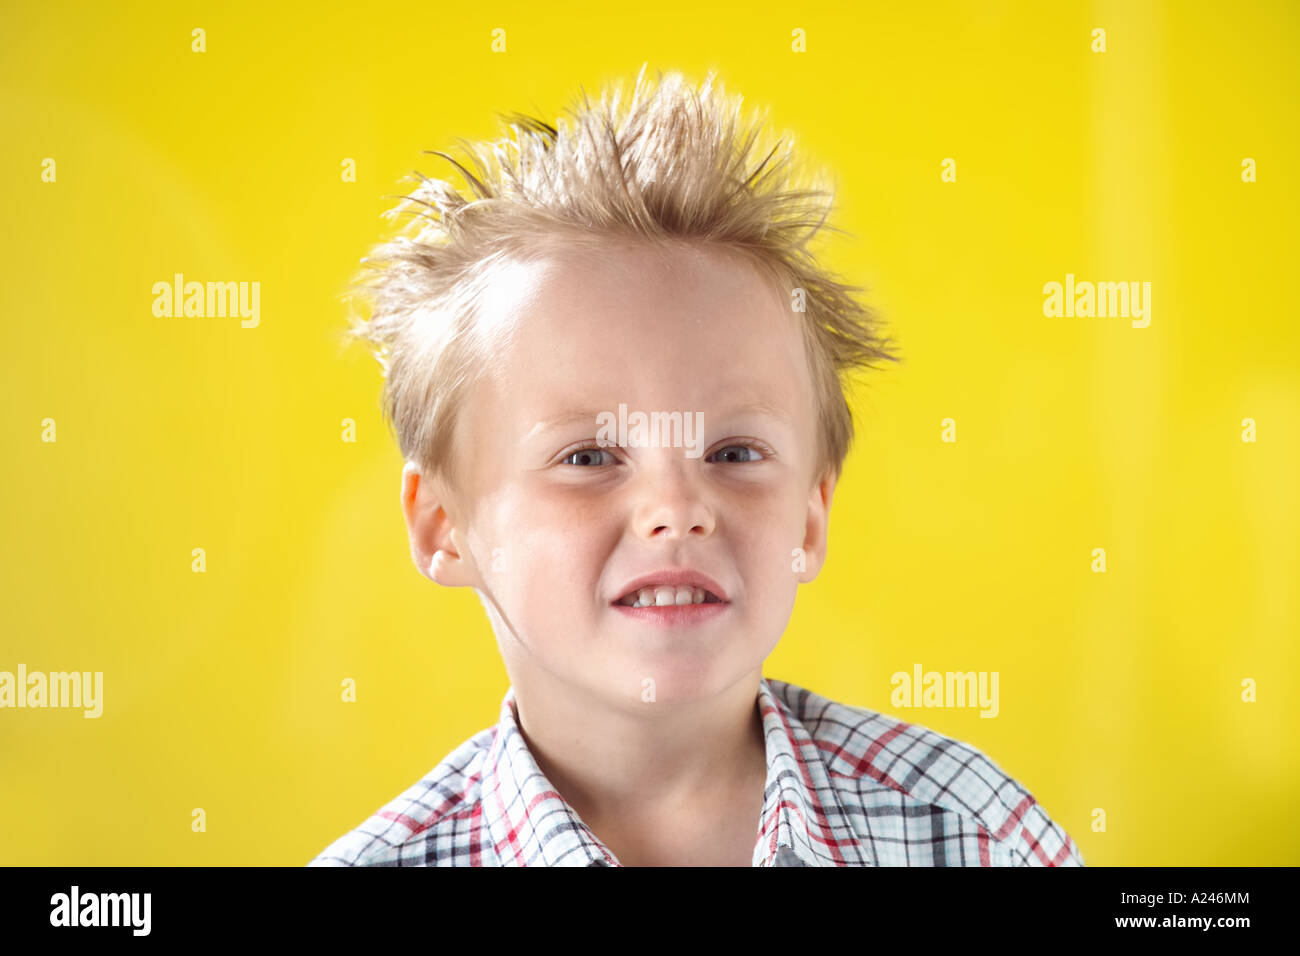 Blonde Boy aged 5-7 years against yellow studio background pulling funny faces while having his hair blow dried. Stock Photo